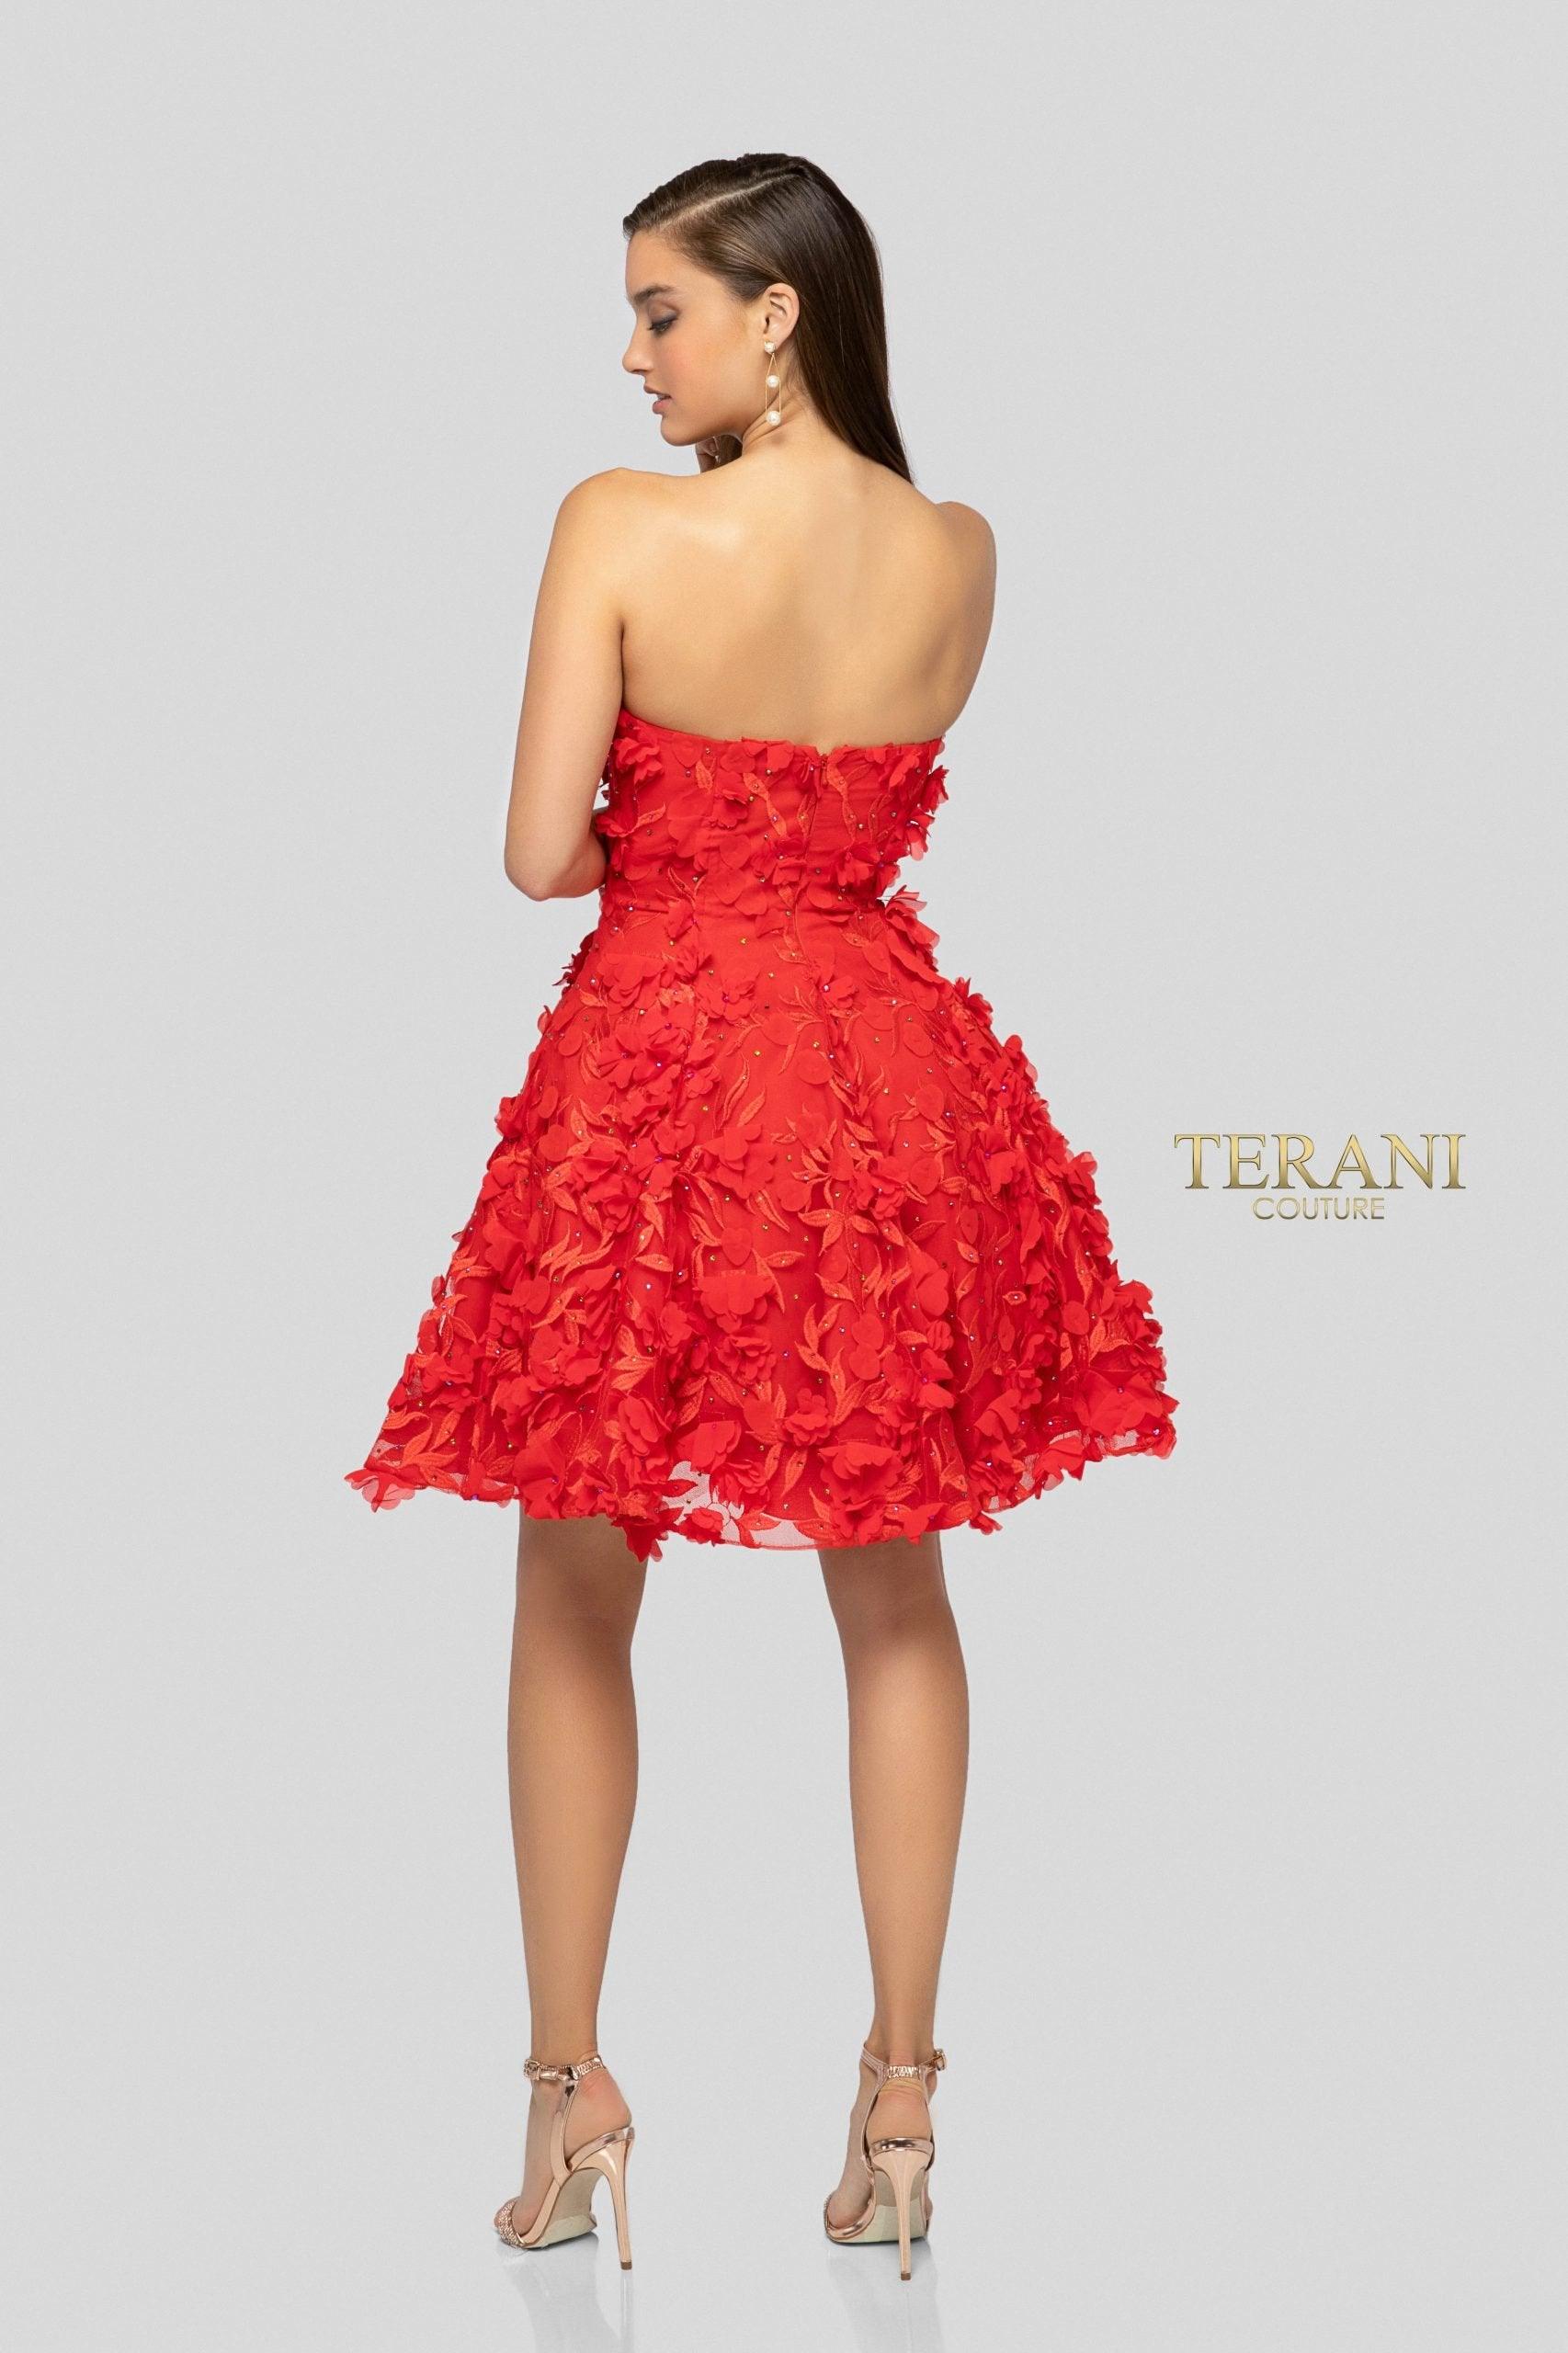 Terani Couture Short Strapless Dress 1911P8057 - The Dress Outlet